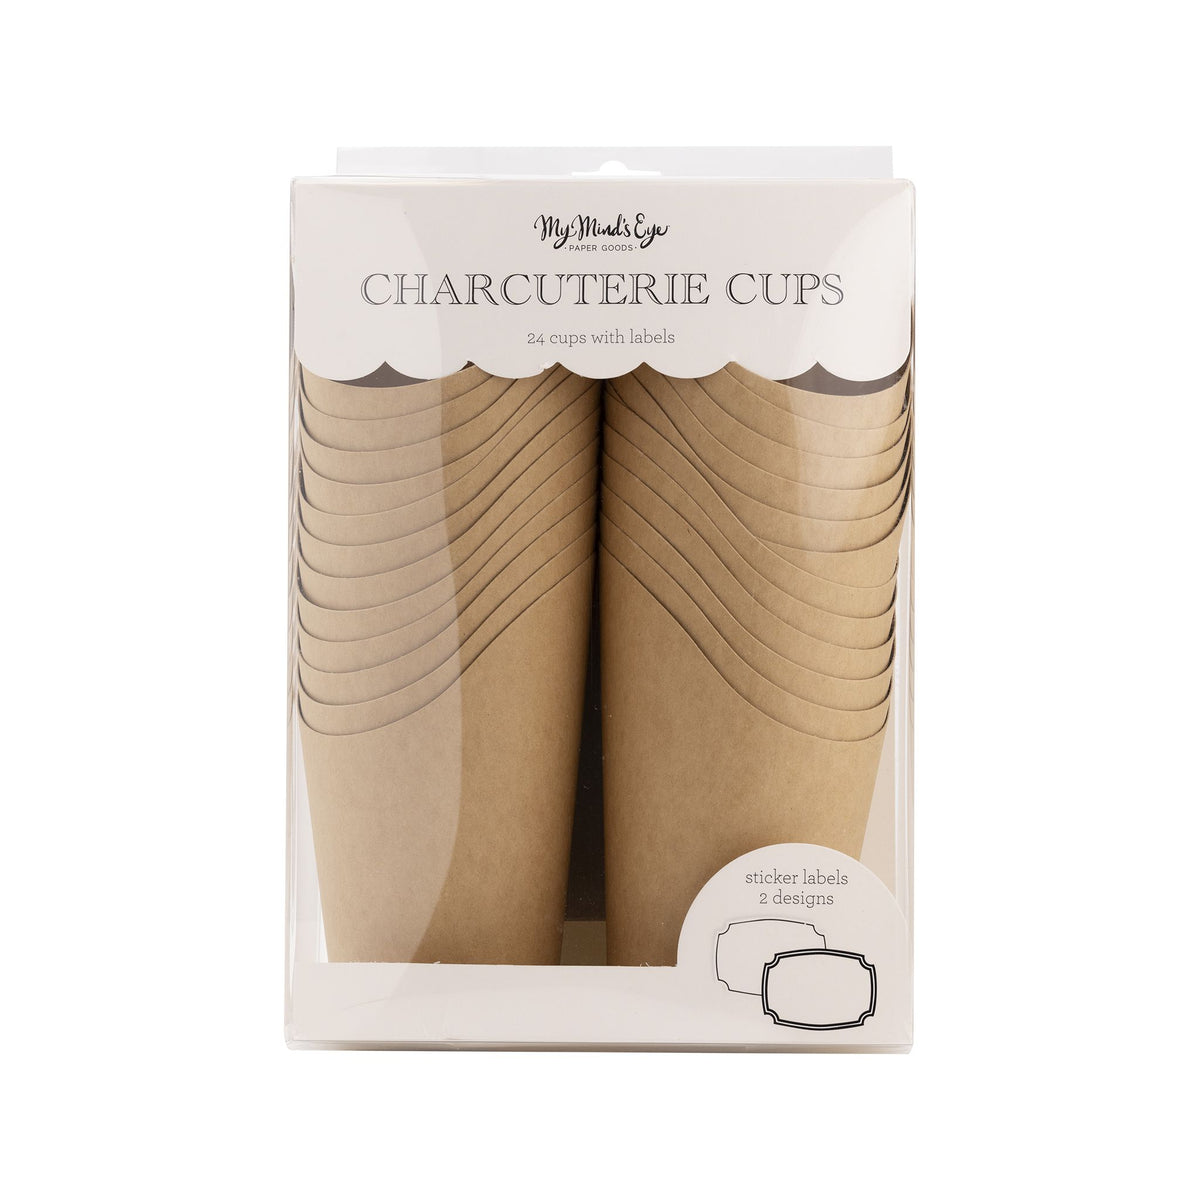 Kraft Charcuterie Cups with sticker labels (24ct) - The Preppy Bunny